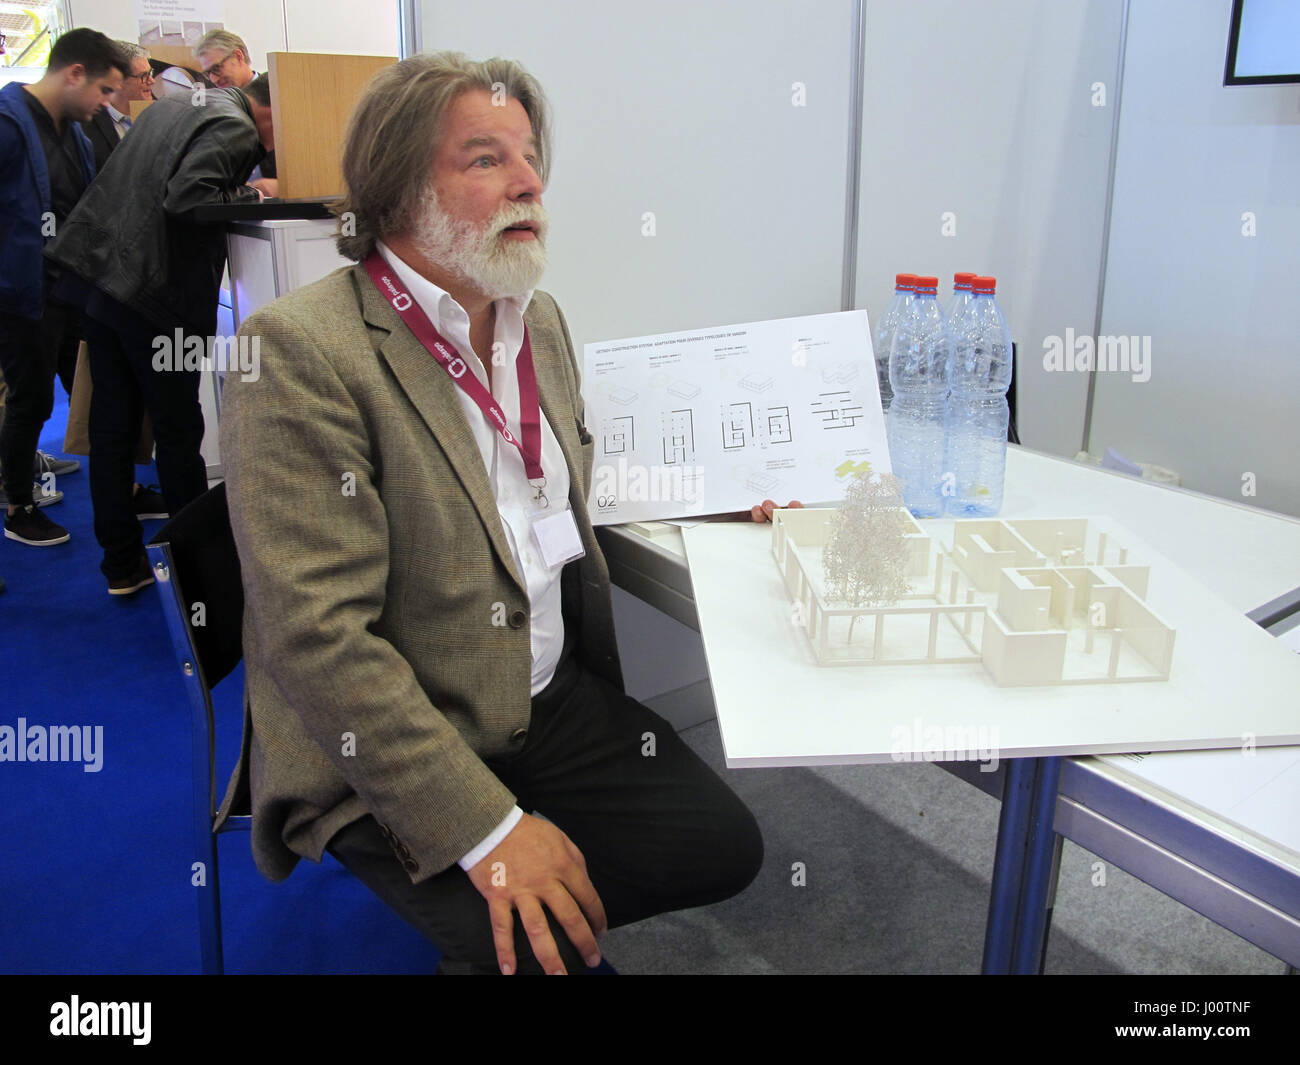 Geneva, Switzerland. 29th Mar, 2017. Igor Ustinov, son of the late actor Peter Ustinov, presents a construction system for pre-constructed houses made of recycled plastic bottles at the Inventions fair in Geneva, Switzerland, 29 March 2017. Photo: Christiane Oelrich/dpa/Alamy Live News Stock Photo